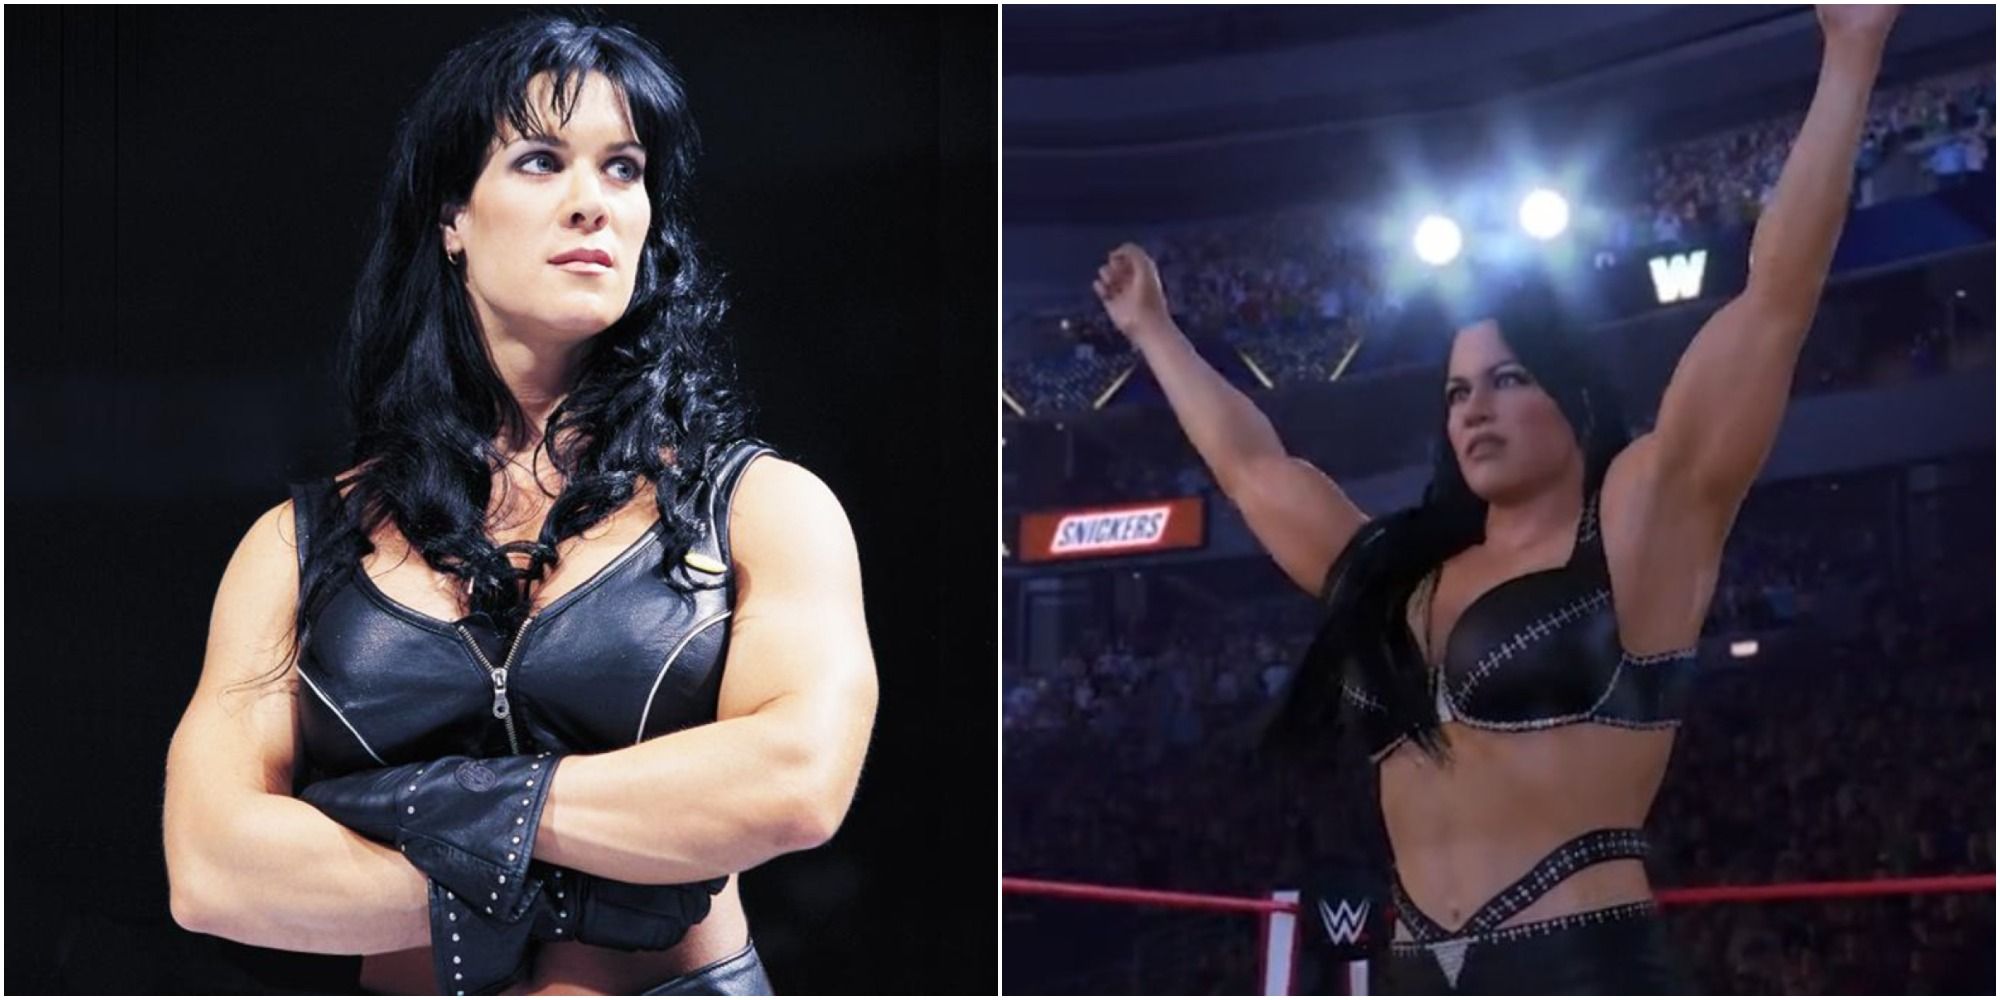 TheGamerWebsite - Chyna Has Been Confirmed For The WWE 2K22 Roster - Tin tứ...